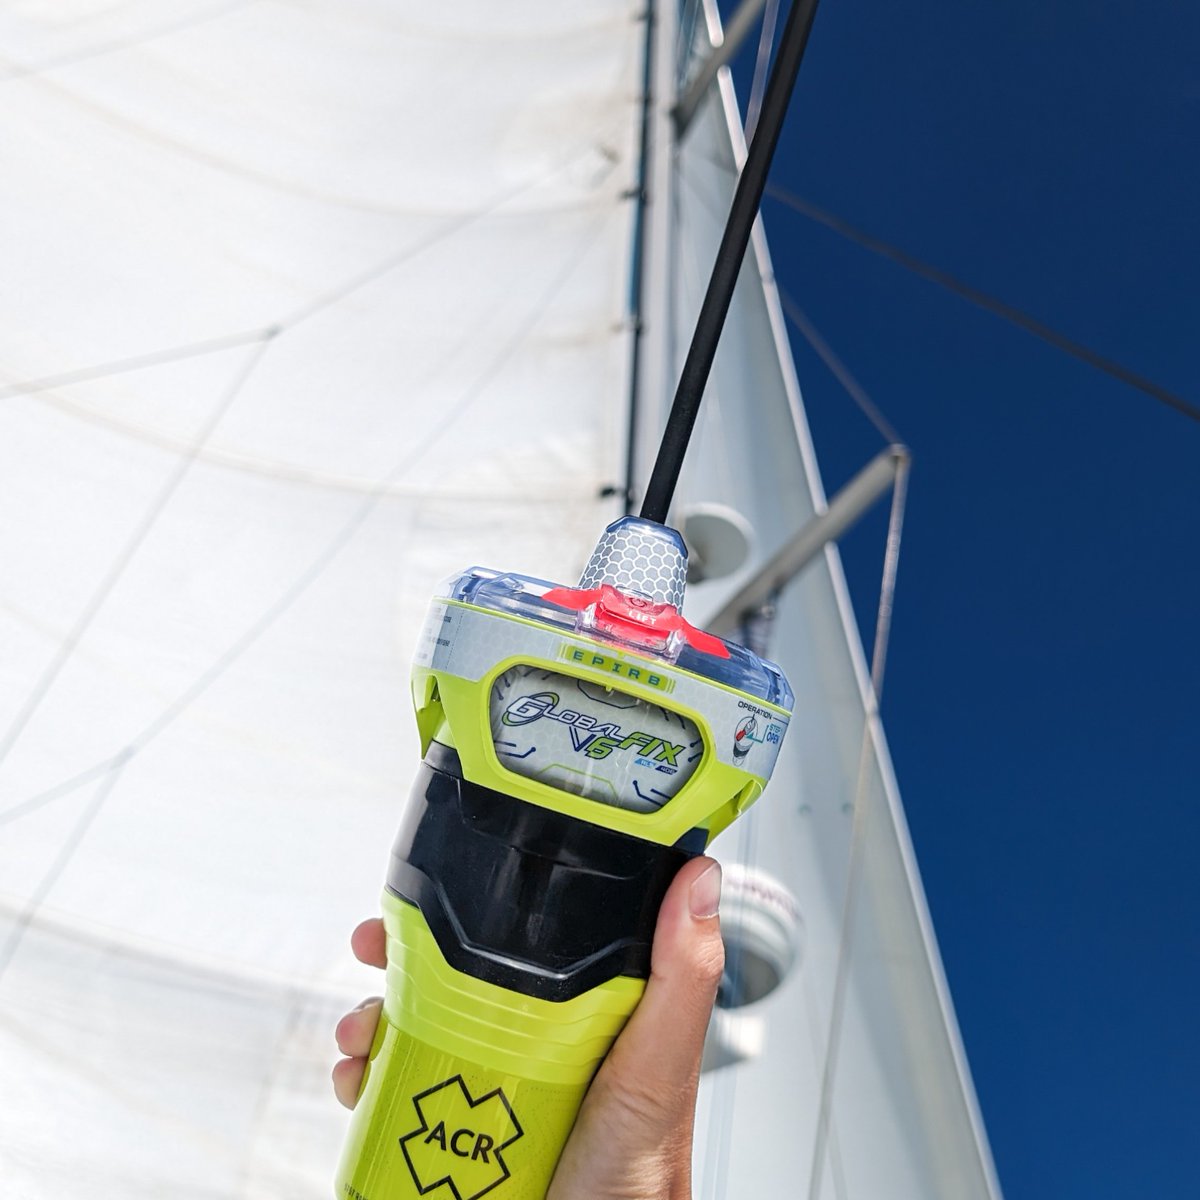 ⛵️ #Sail into safety with an #EPIRB! 🌊 An Emergency Position Indicating Radio Beacon is a crucial tool for every sailor. In case of an emergency, an EPIRB transmits your location to rescuers, ensuring a faster response time. #SailingSafety #BoatingSafety #SailSafe